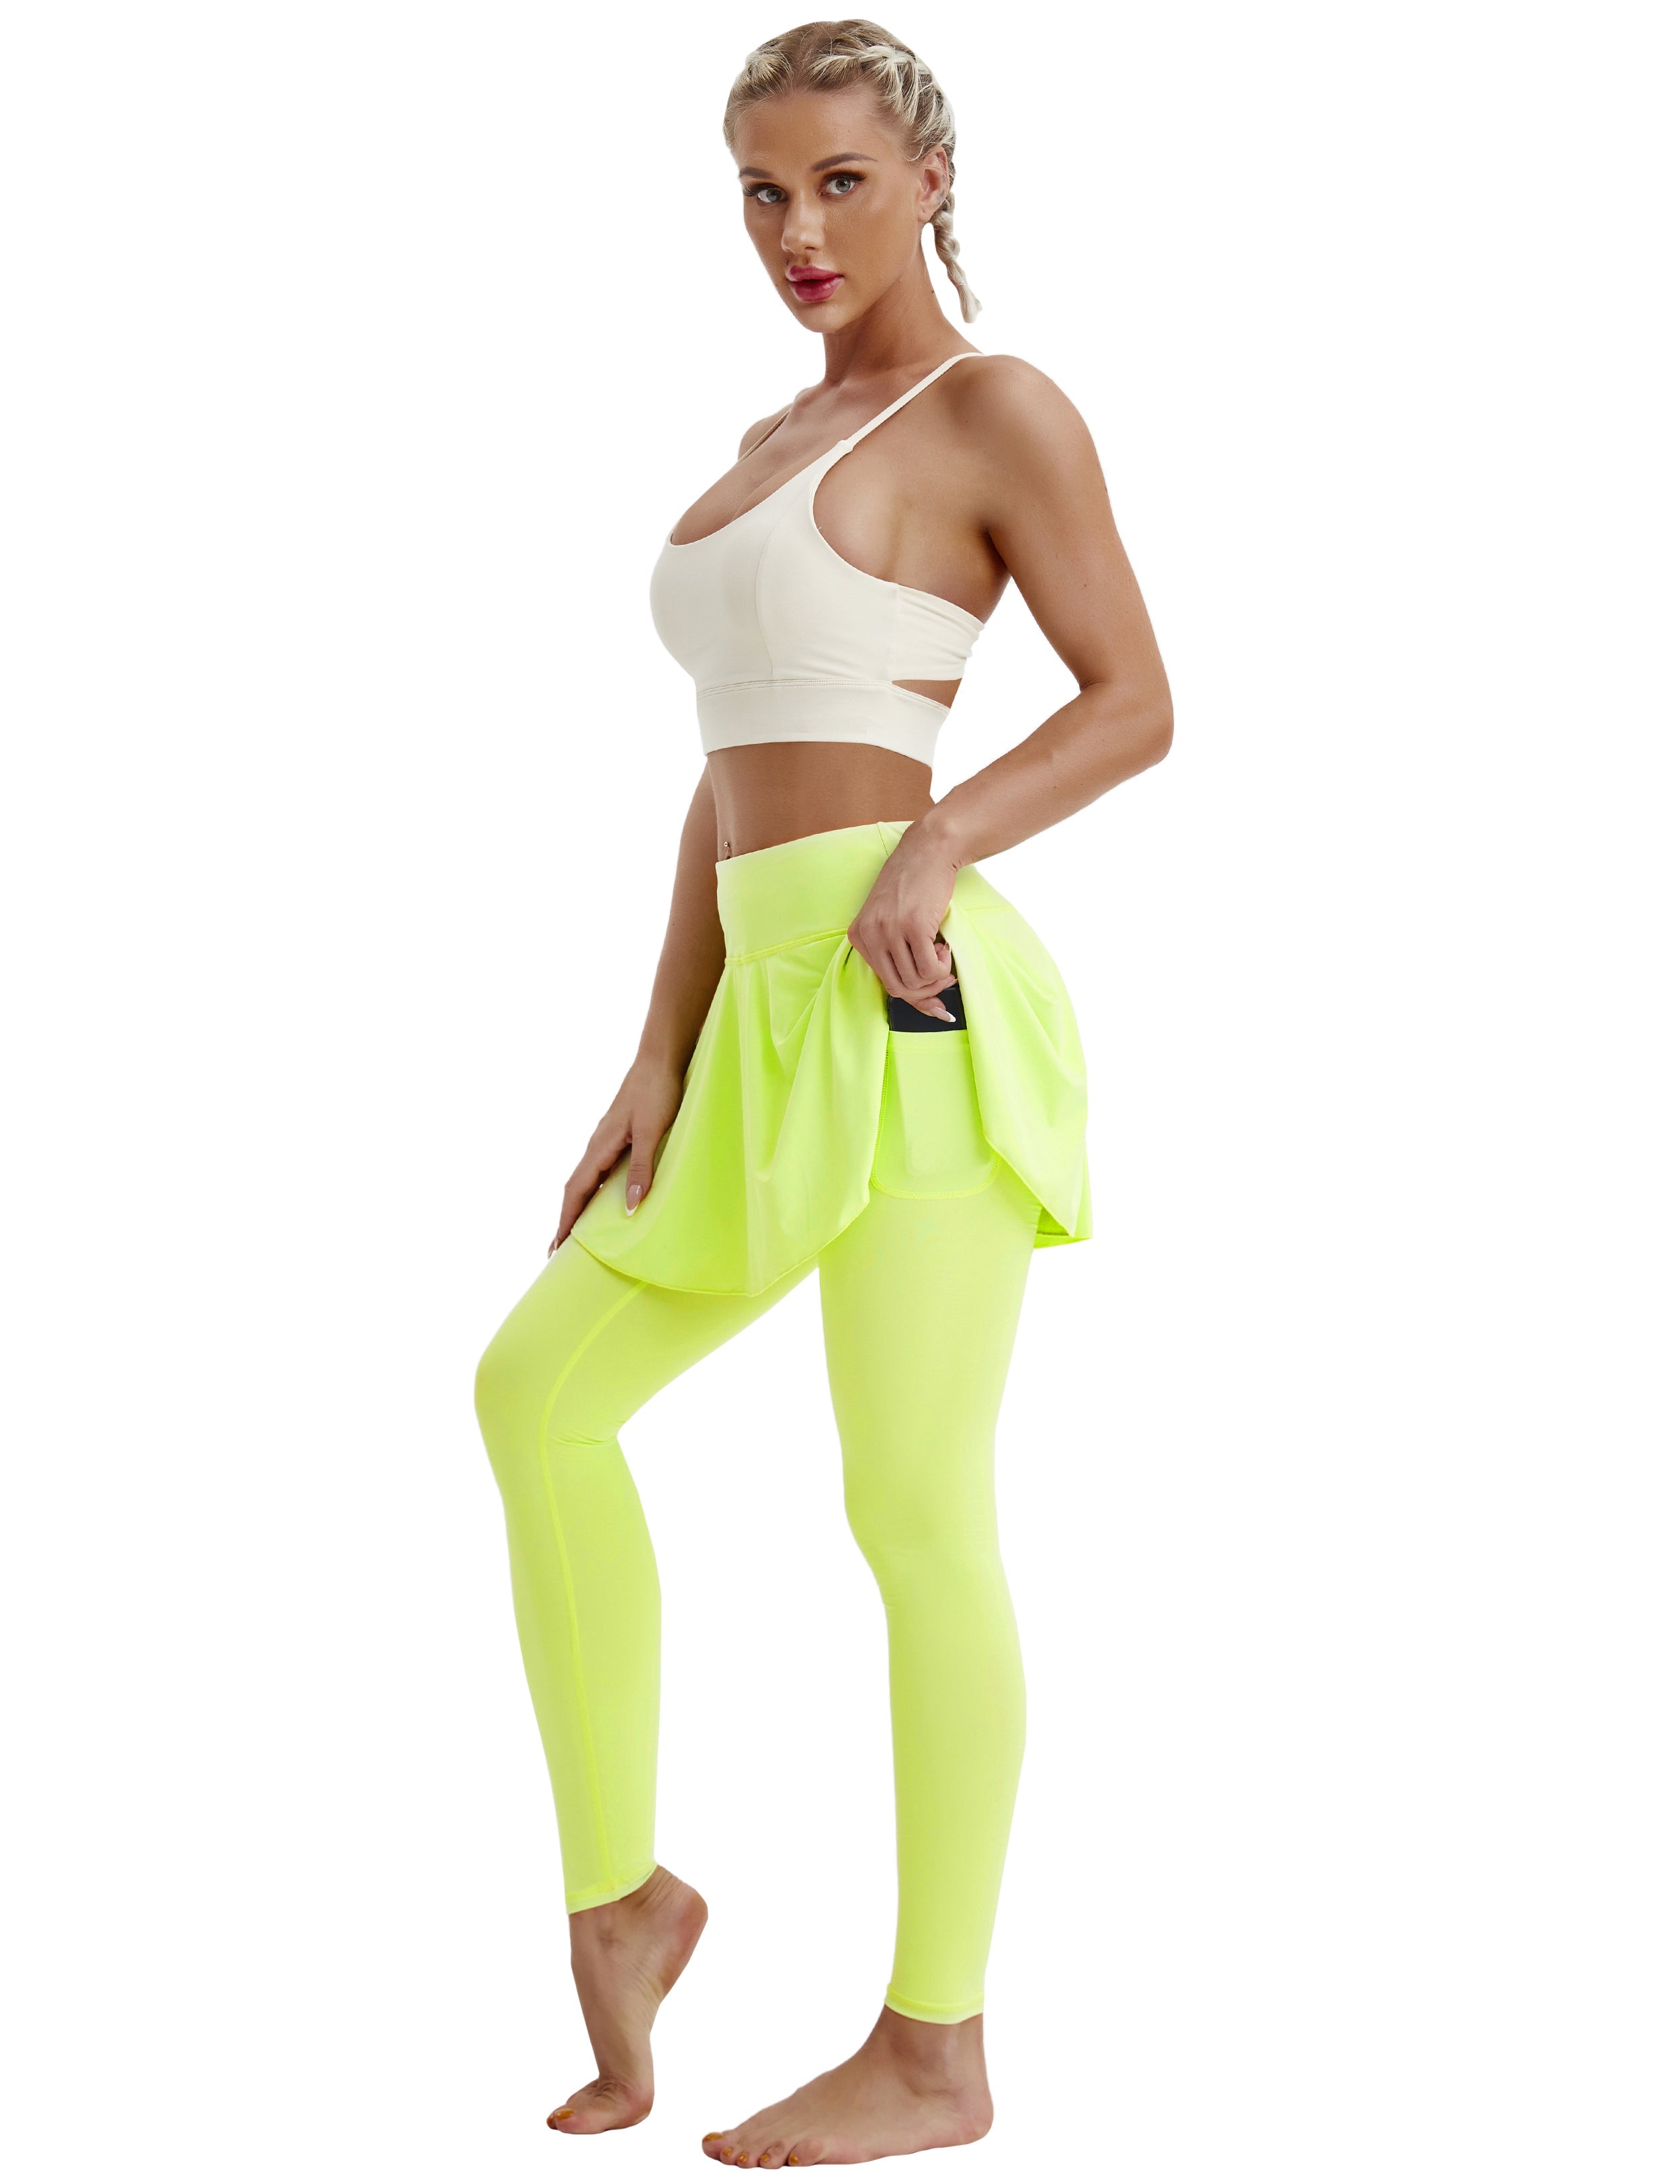 Athletic Tennis Golf Skort with Pocket Shorts neonyellow 80%Nylon/20%Spandex UPF 50+ sun protection Elastic closure Lightweight, Wrinkle Moisture wicking Quick drying Secure & comfortable two layer Hidden pocket